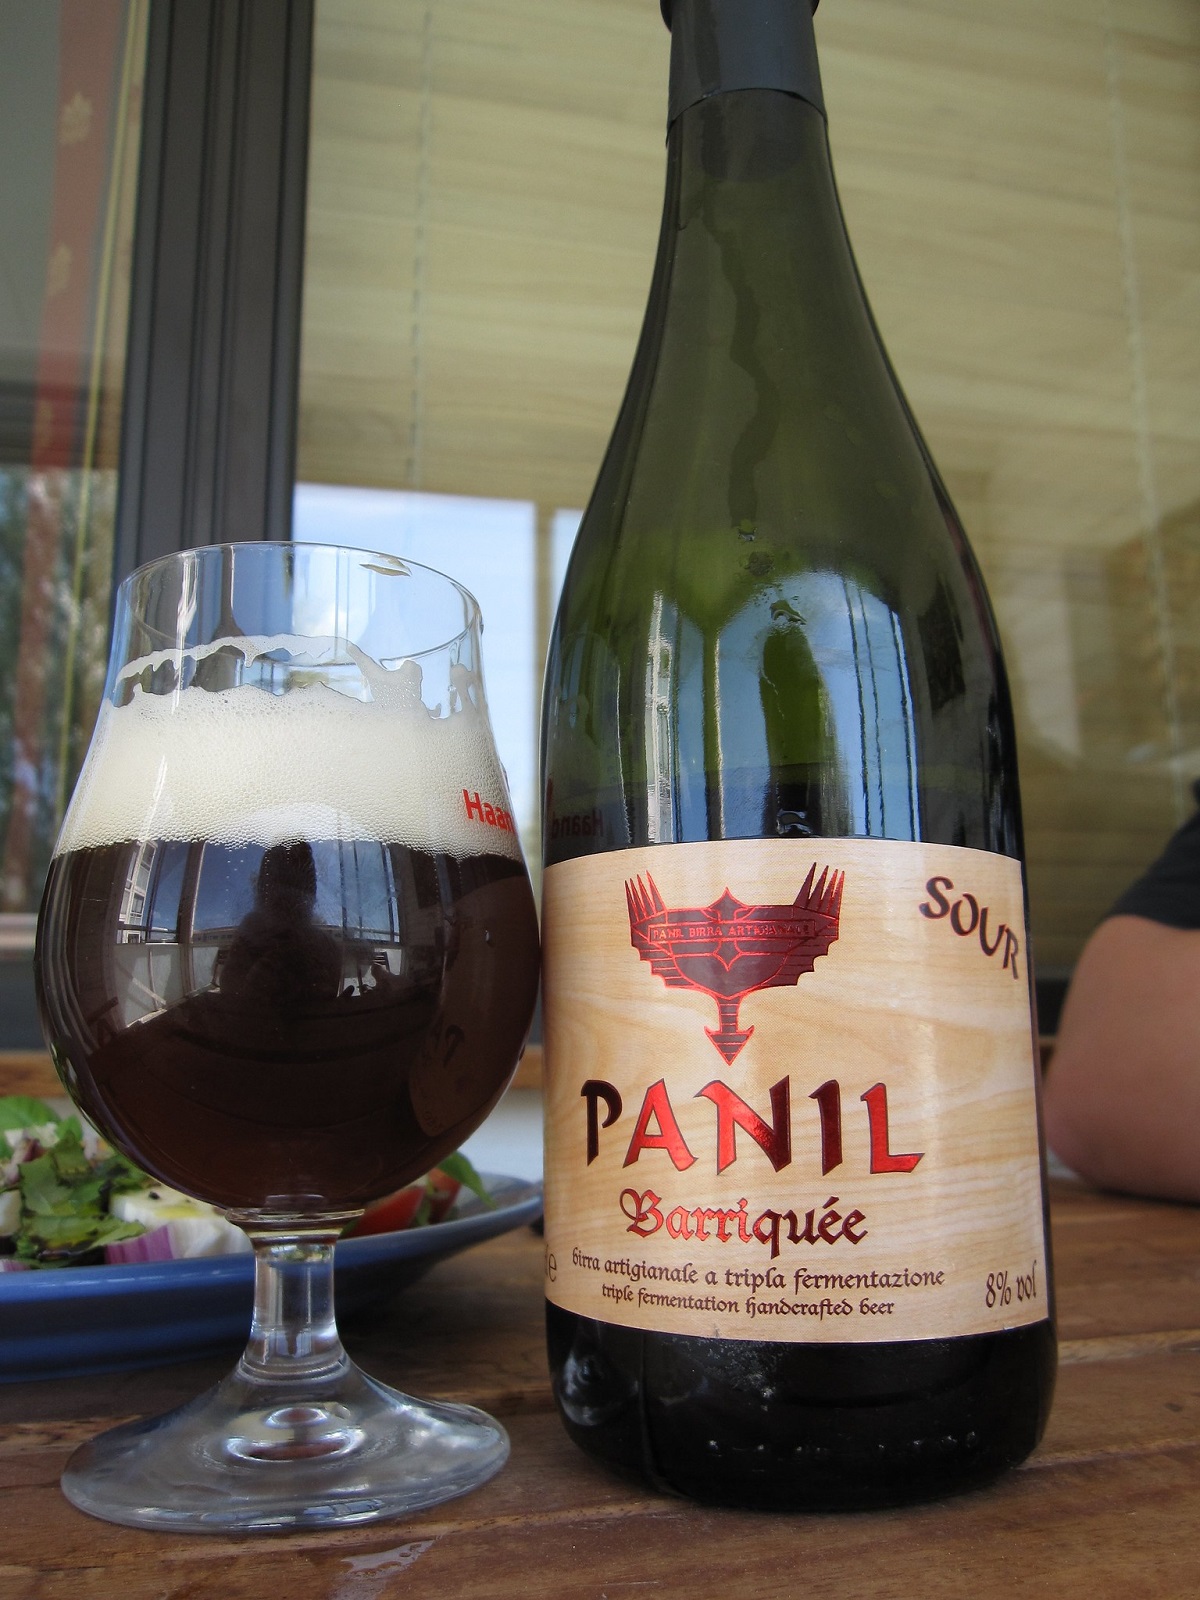 A large bottle of Panil Barriquee wine from Italy along with a mug of dark beer